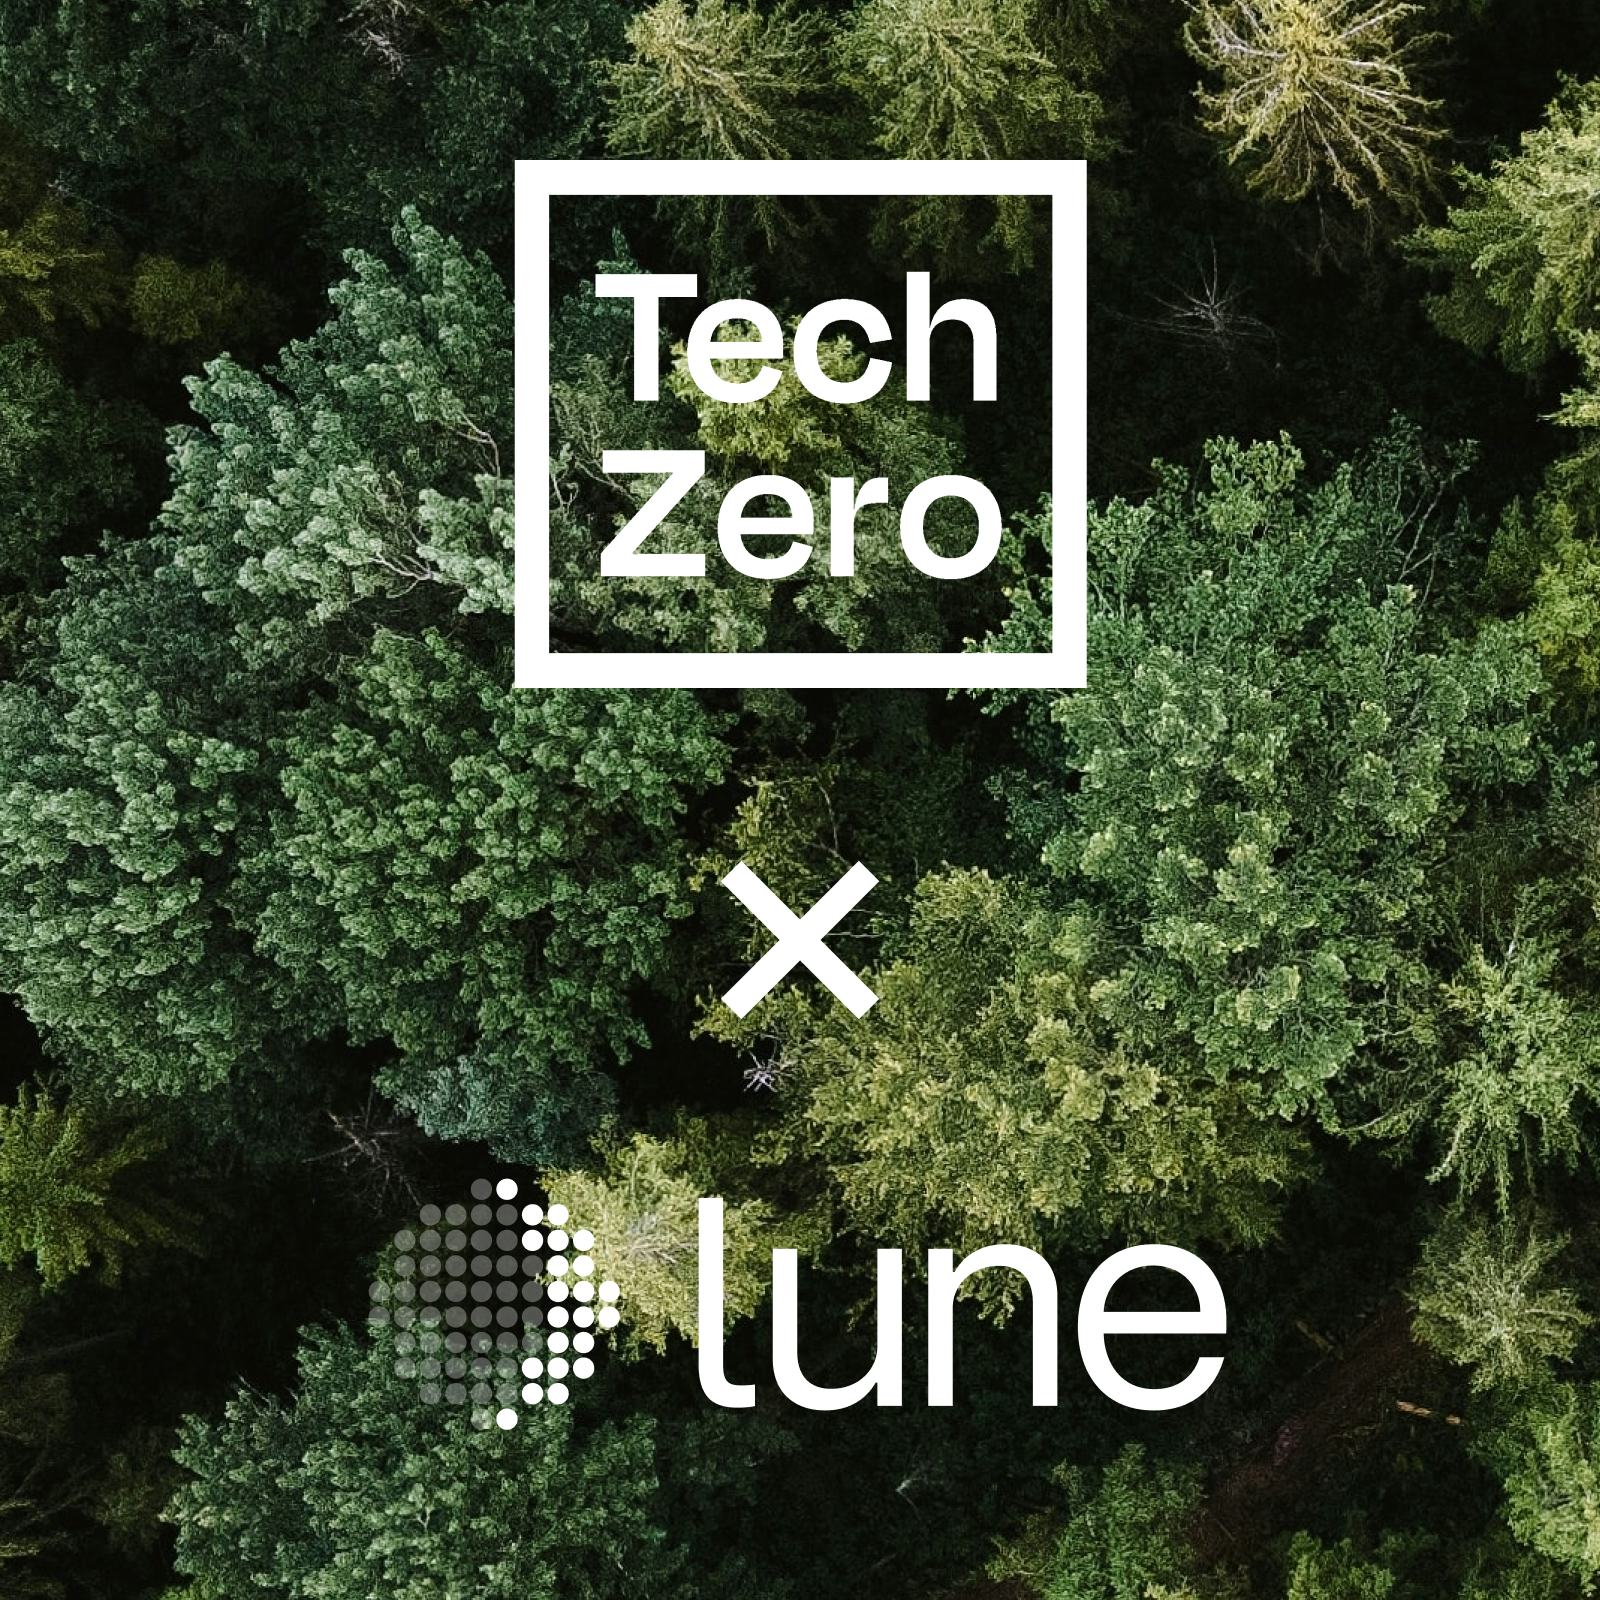 3 memorable moments from London’s Tech Zero event